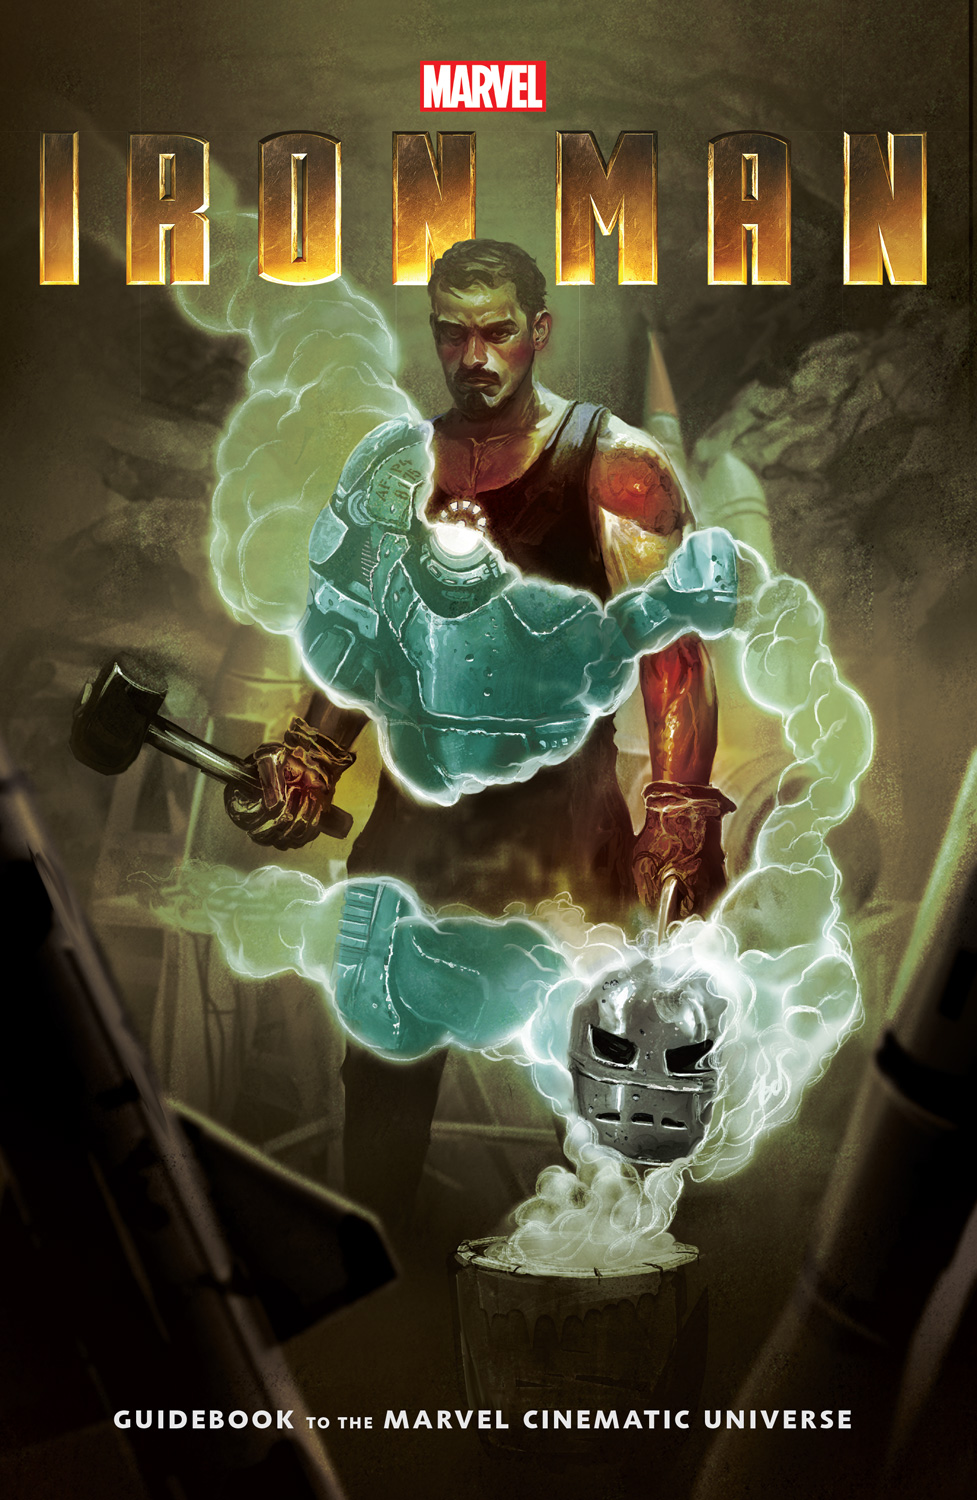 Guidebook_to_the_Marvel_Cinematic_Universe_Iron_Man_Cover